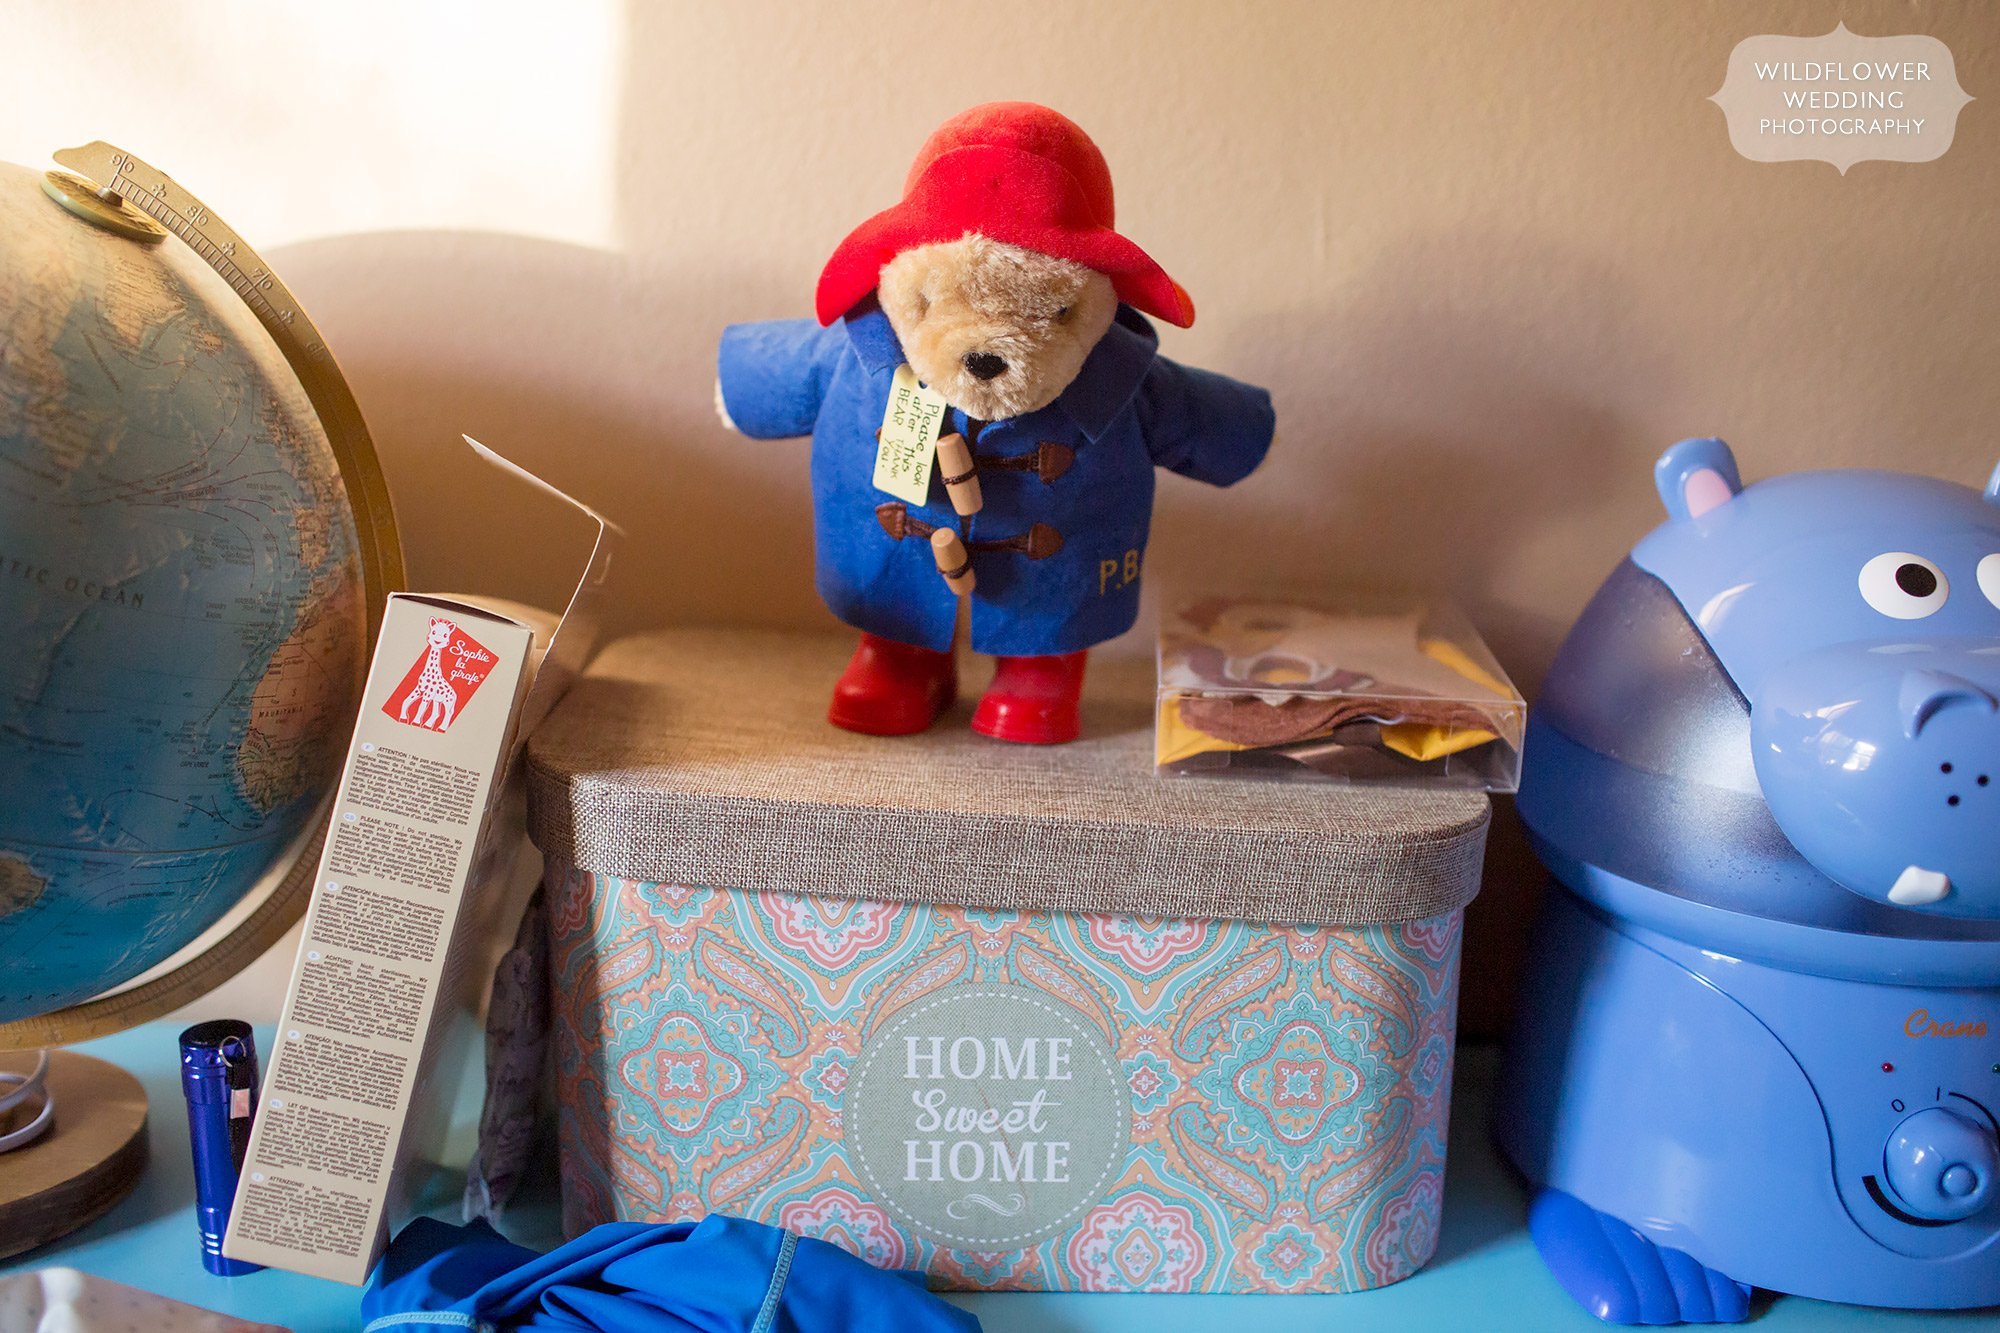 Detail photo of Paddington bear in the baby's room during this at home photo session.